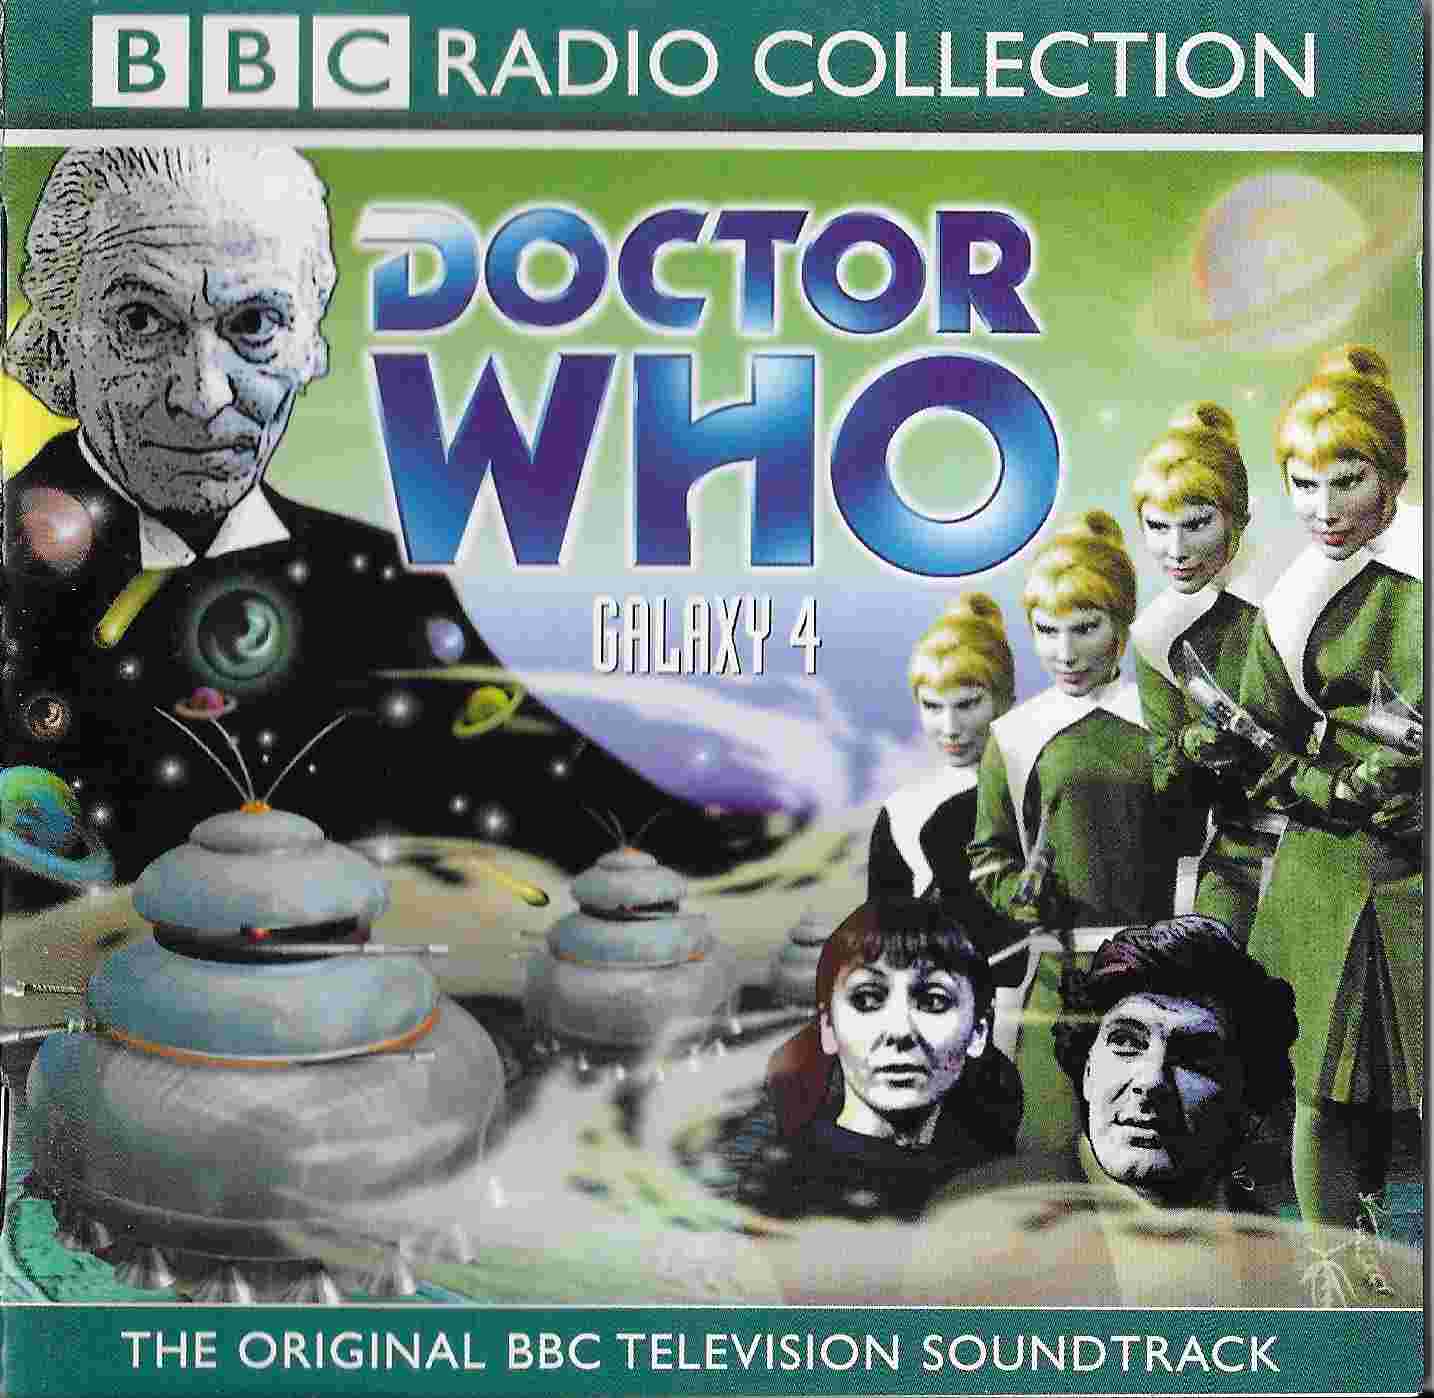 Picture of ISBN 0-563-47700-8 Doctor Who - Galaxy 4 by artist William Emms from the BBC cds - Records and Tapes library